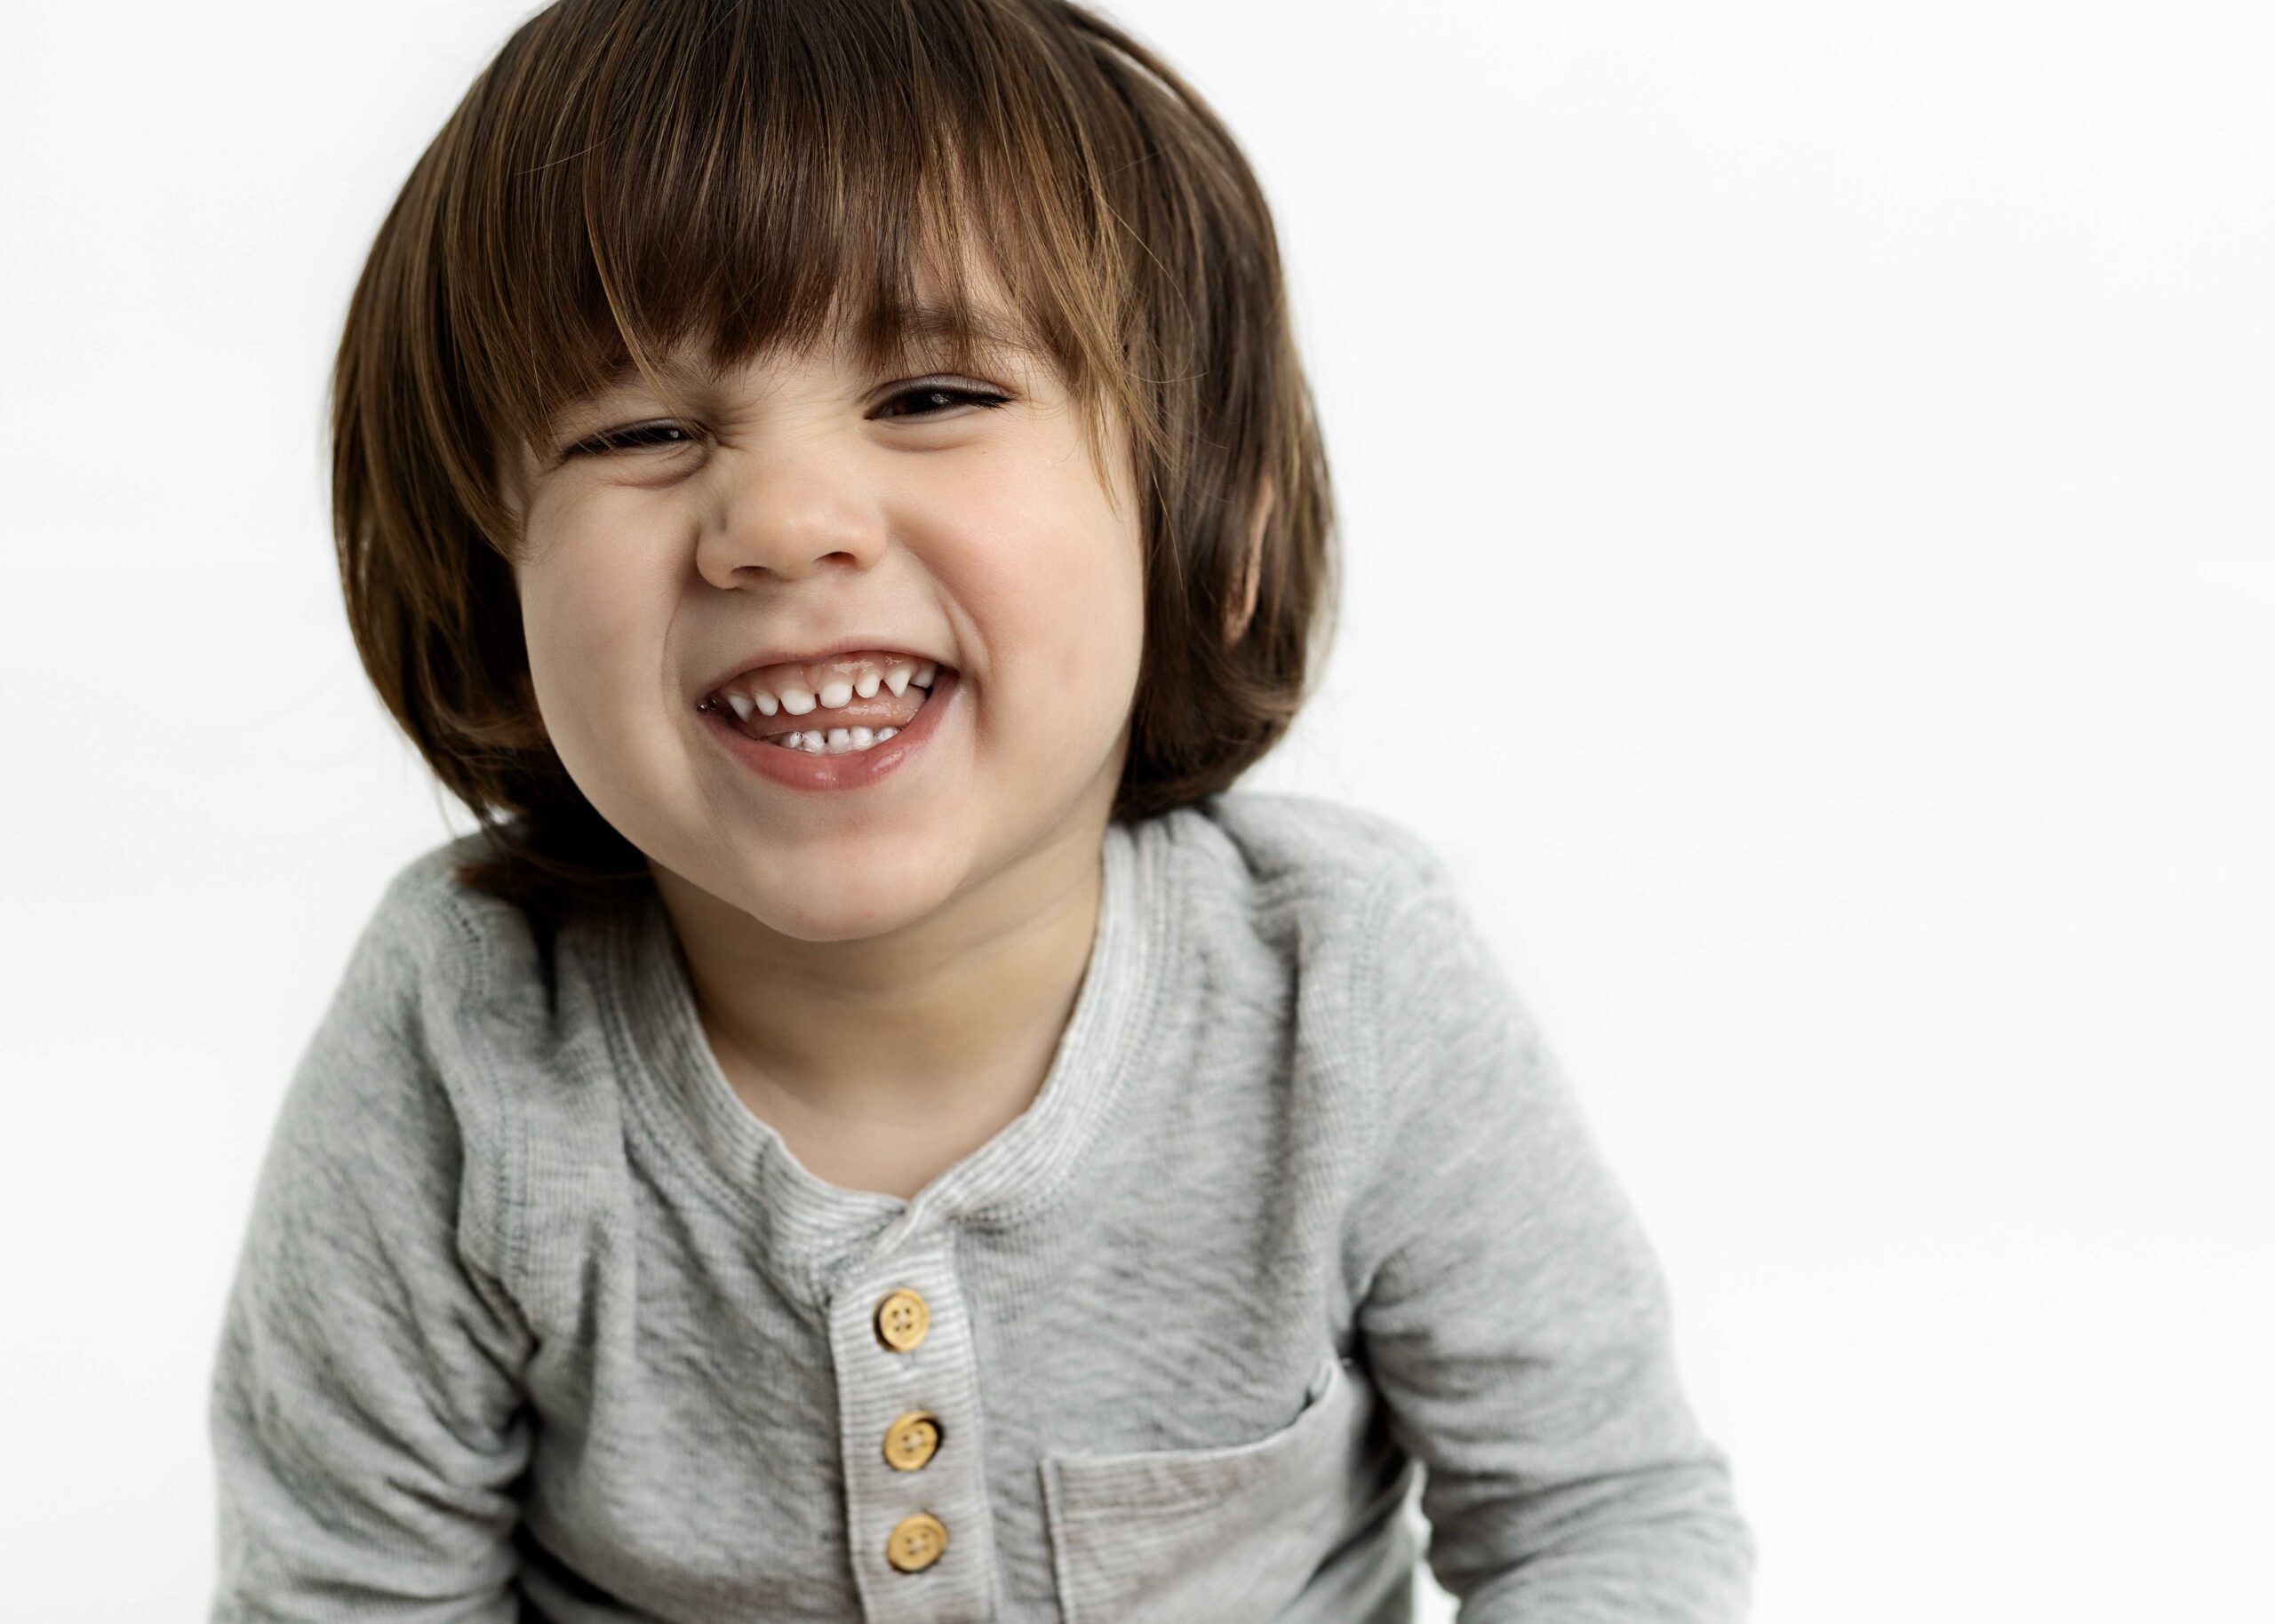 Toddler boy making a silly face at the camera by white studio photography